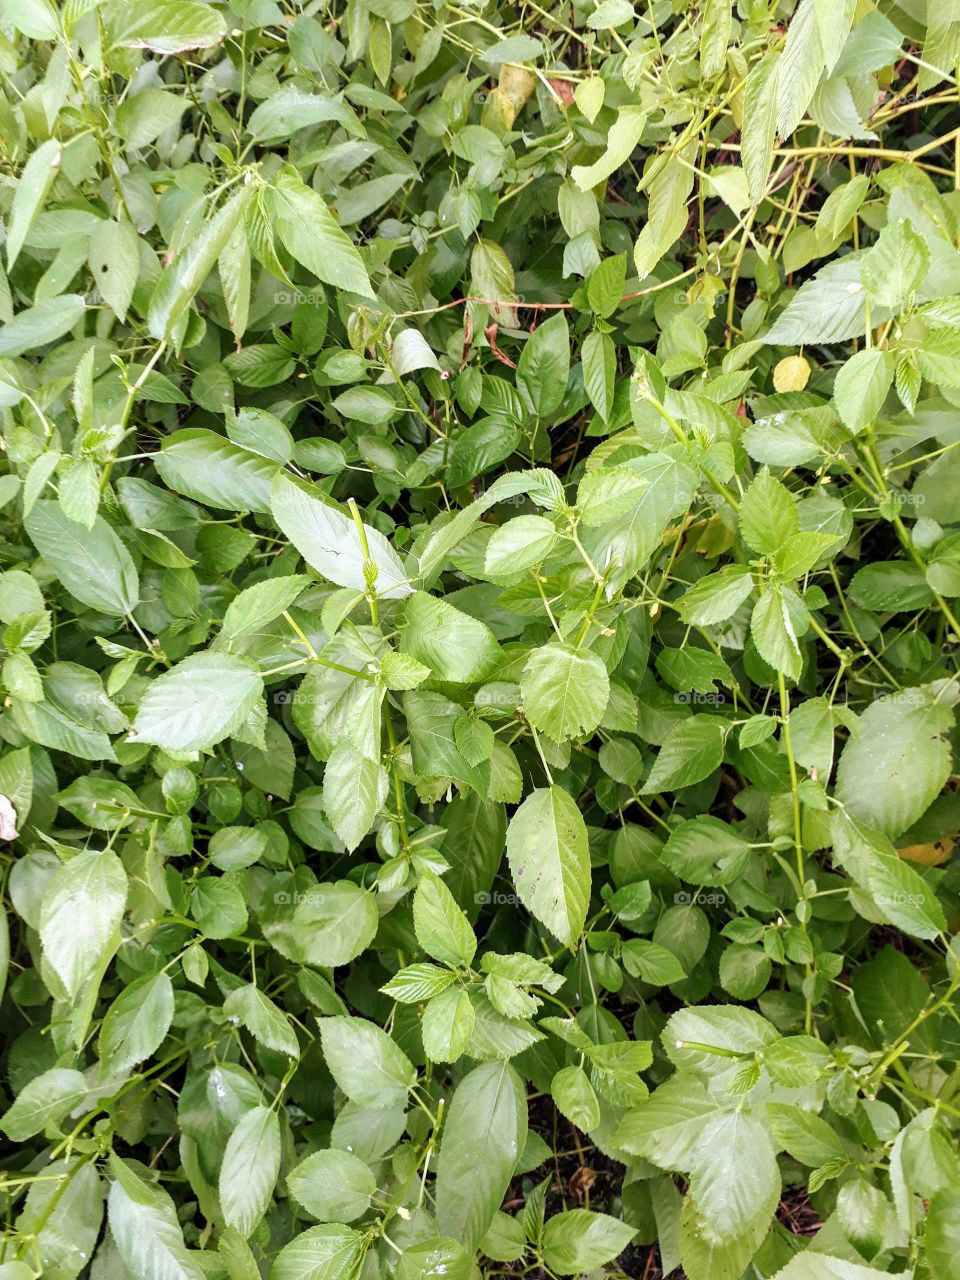 Saluyot, a leafy green vegetable in the Philippines